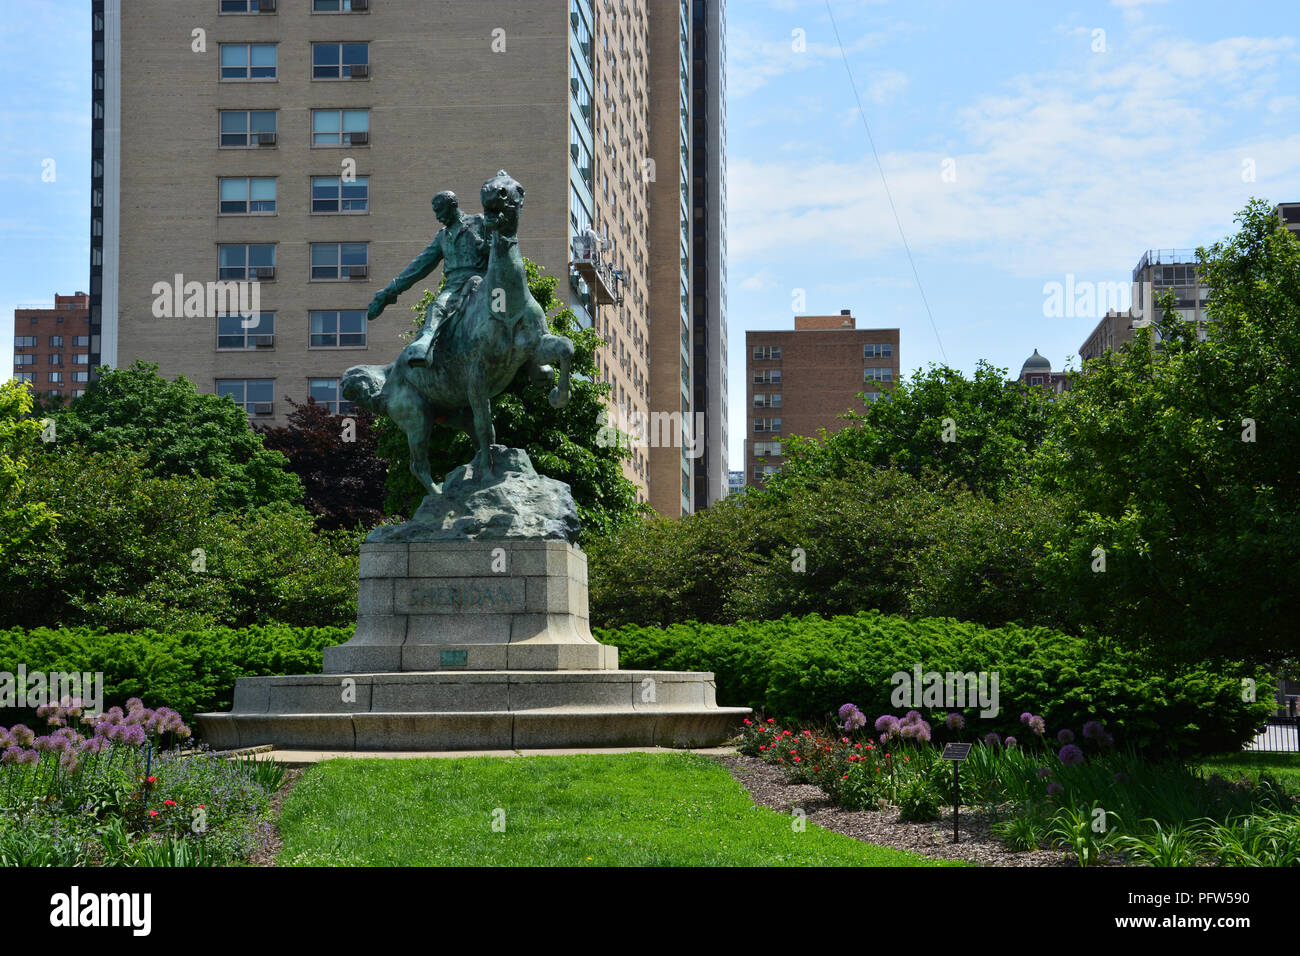 The General Sheridan monument depicting him rallying troops in the Civil War on an island surrounded by traffic in Chicago's Lakeview neighborhood. Stock Photo